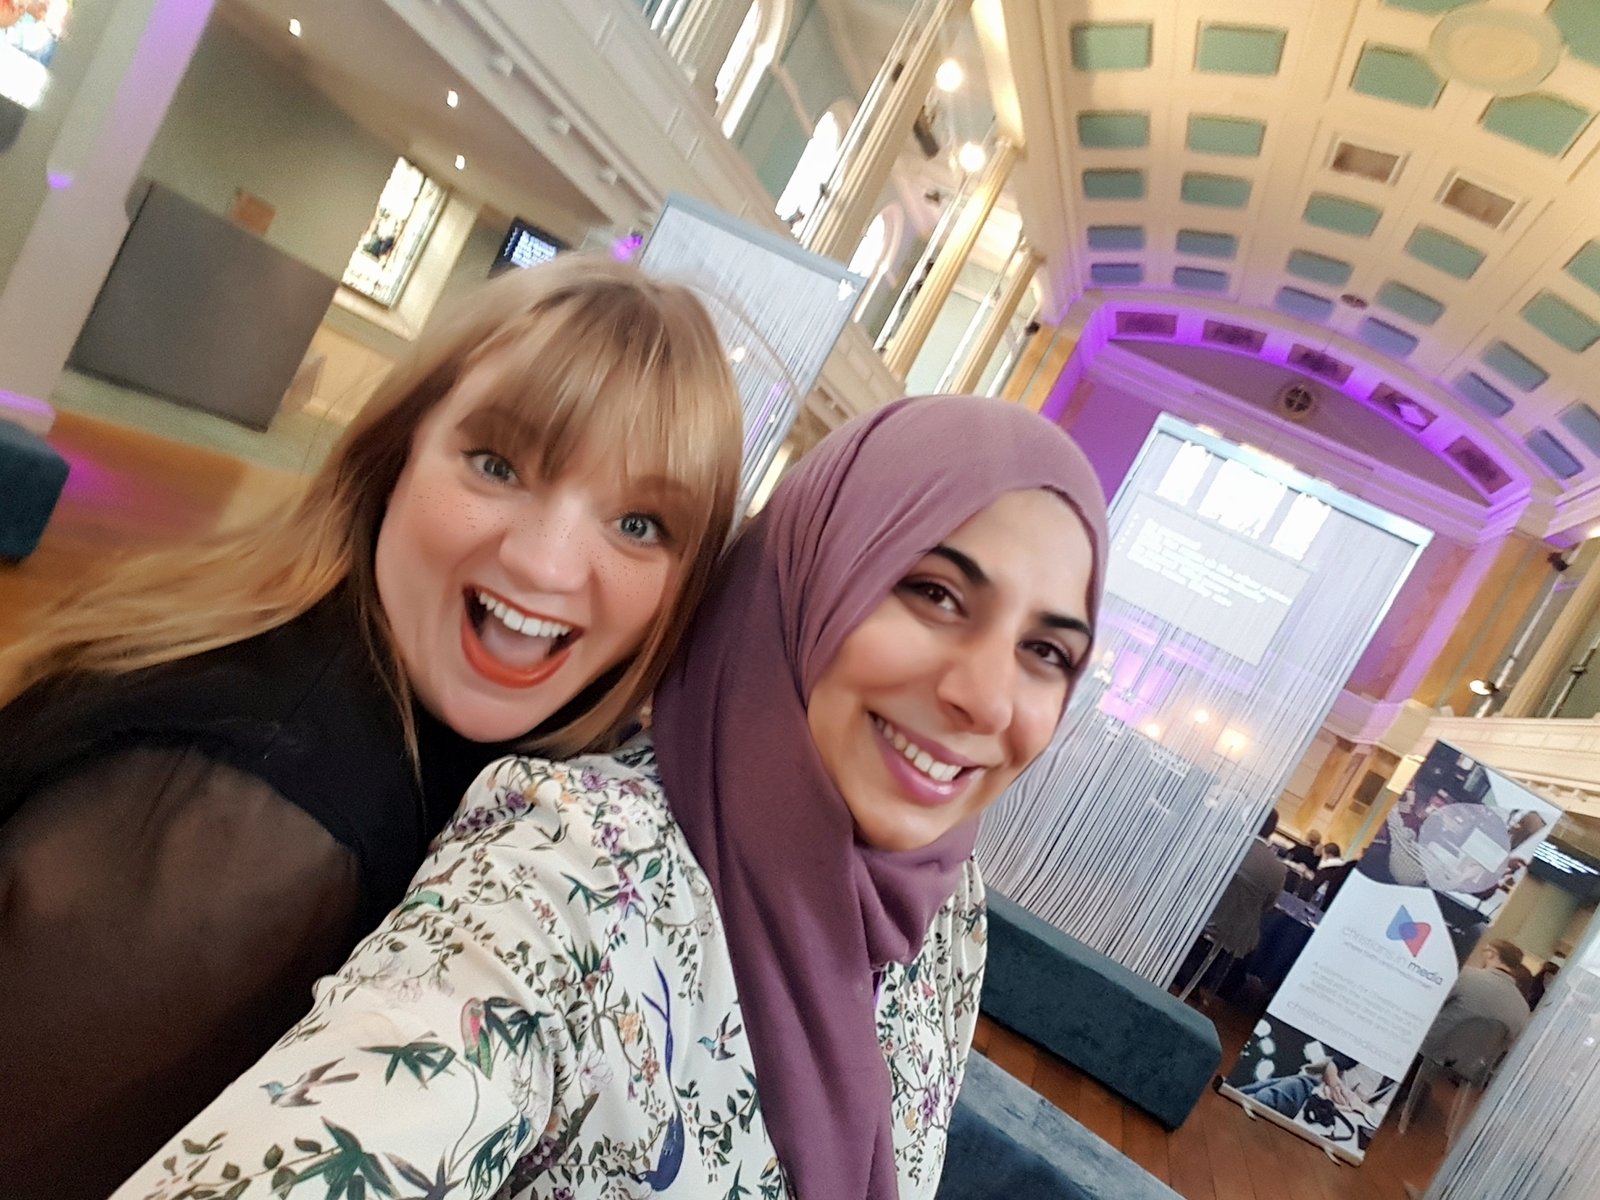 Saba Zaman On Twitter The Vicar And The Hijabi Hanging With My 